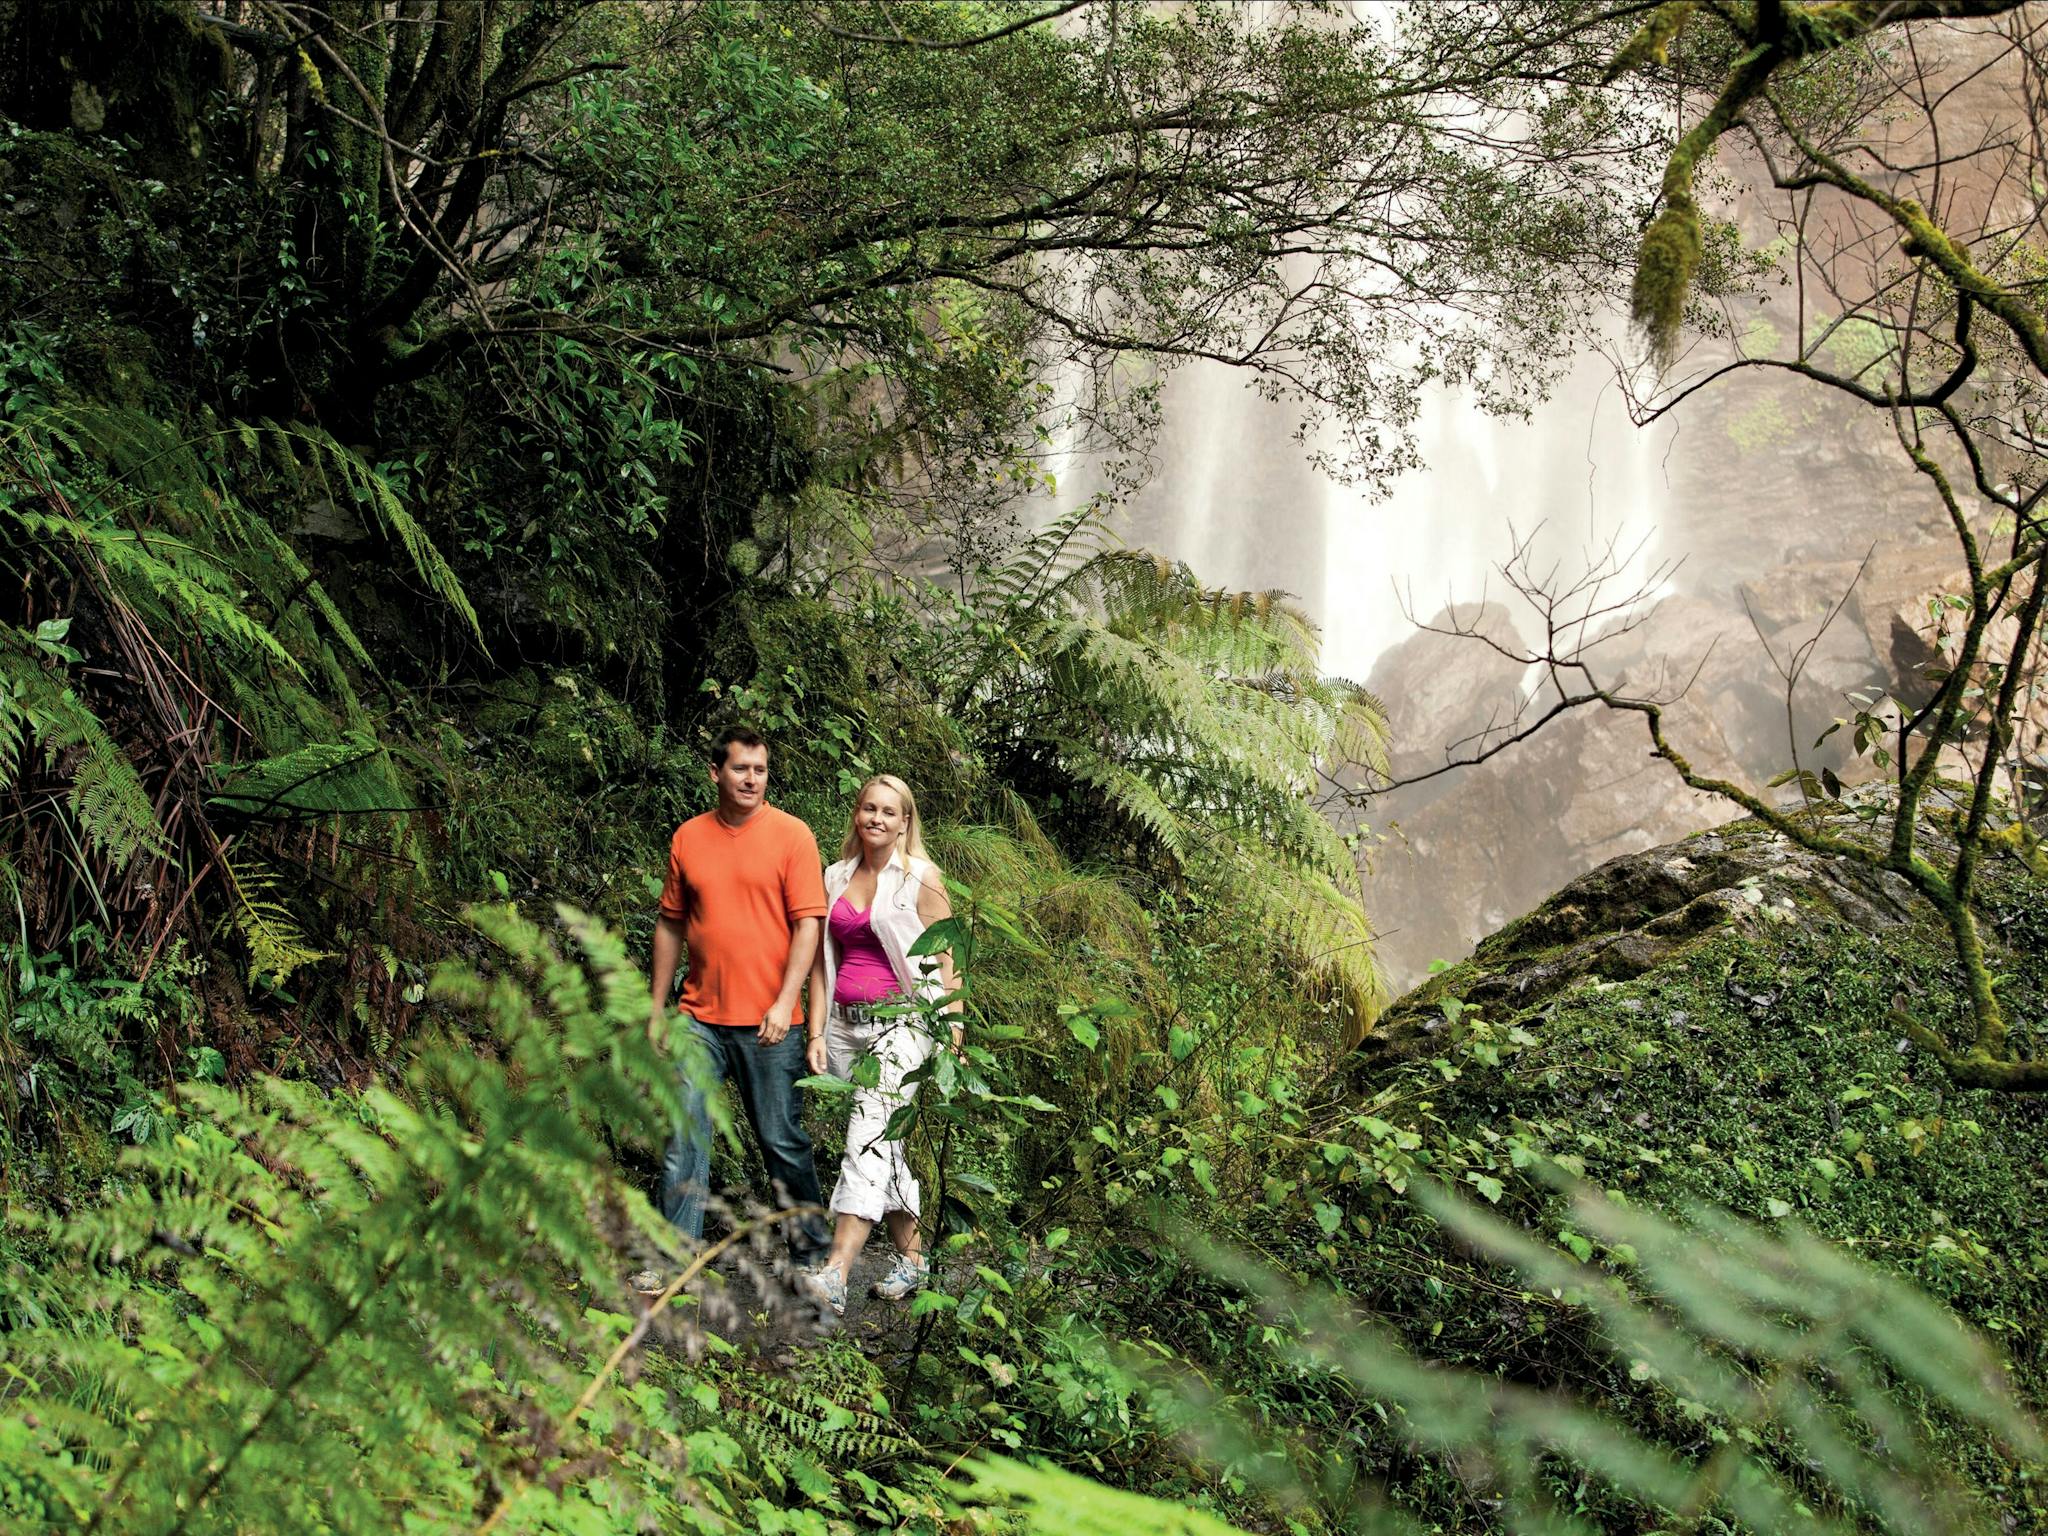 Couple walking through forest at base of falls.